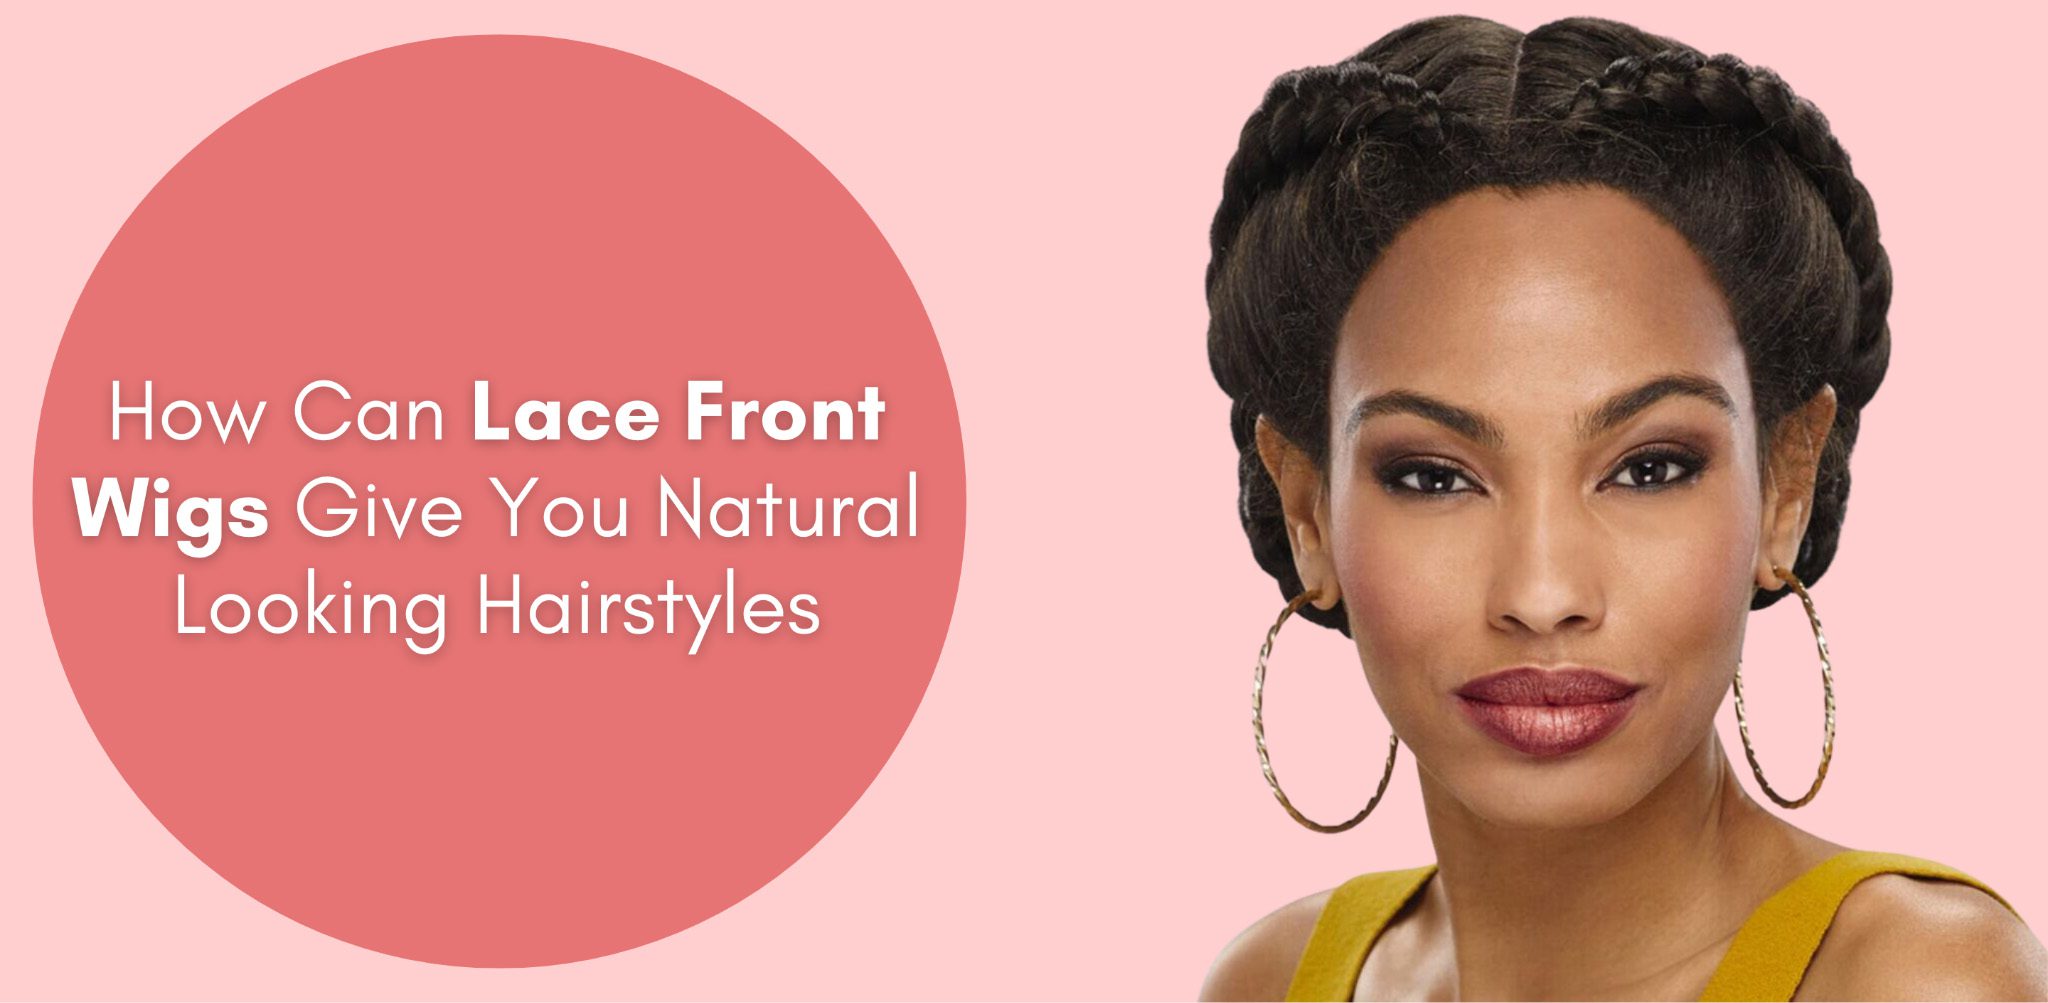 How Can Lace Front Wigs Give You Natural Looking Hairstyles?